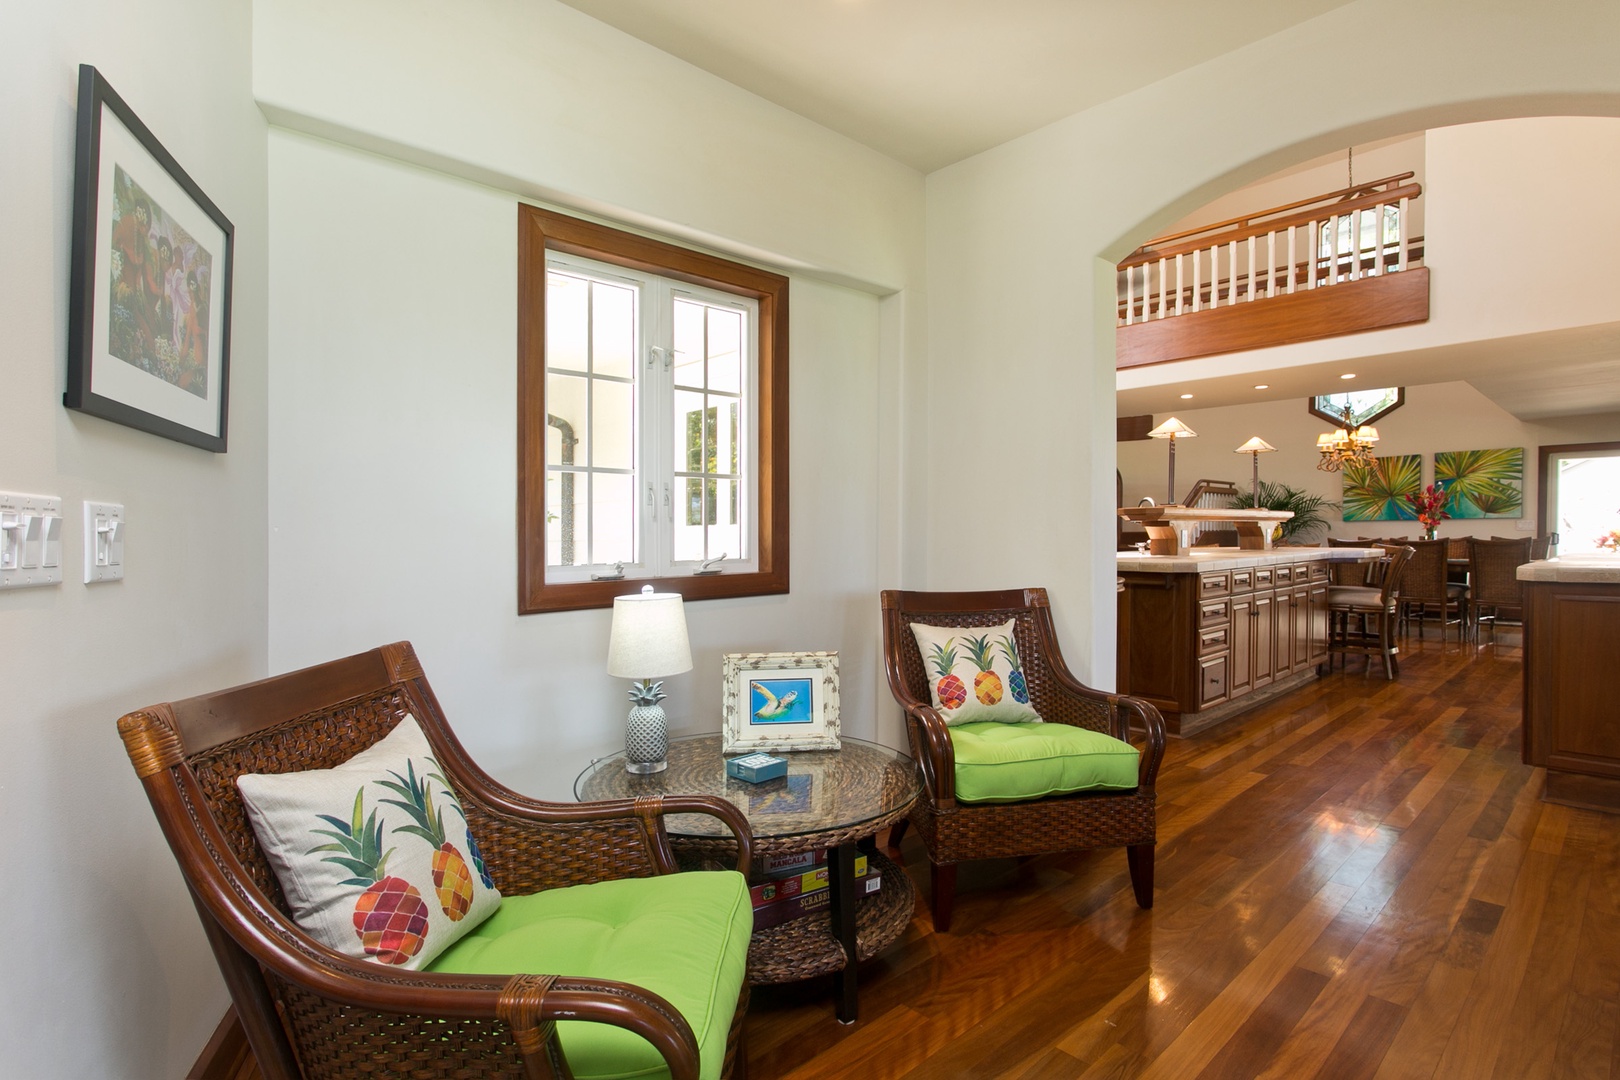 Kailua Vacation Rentals, Hale Melia* - Find a cozy corner for quiet moments or casual chats in this charming nook.